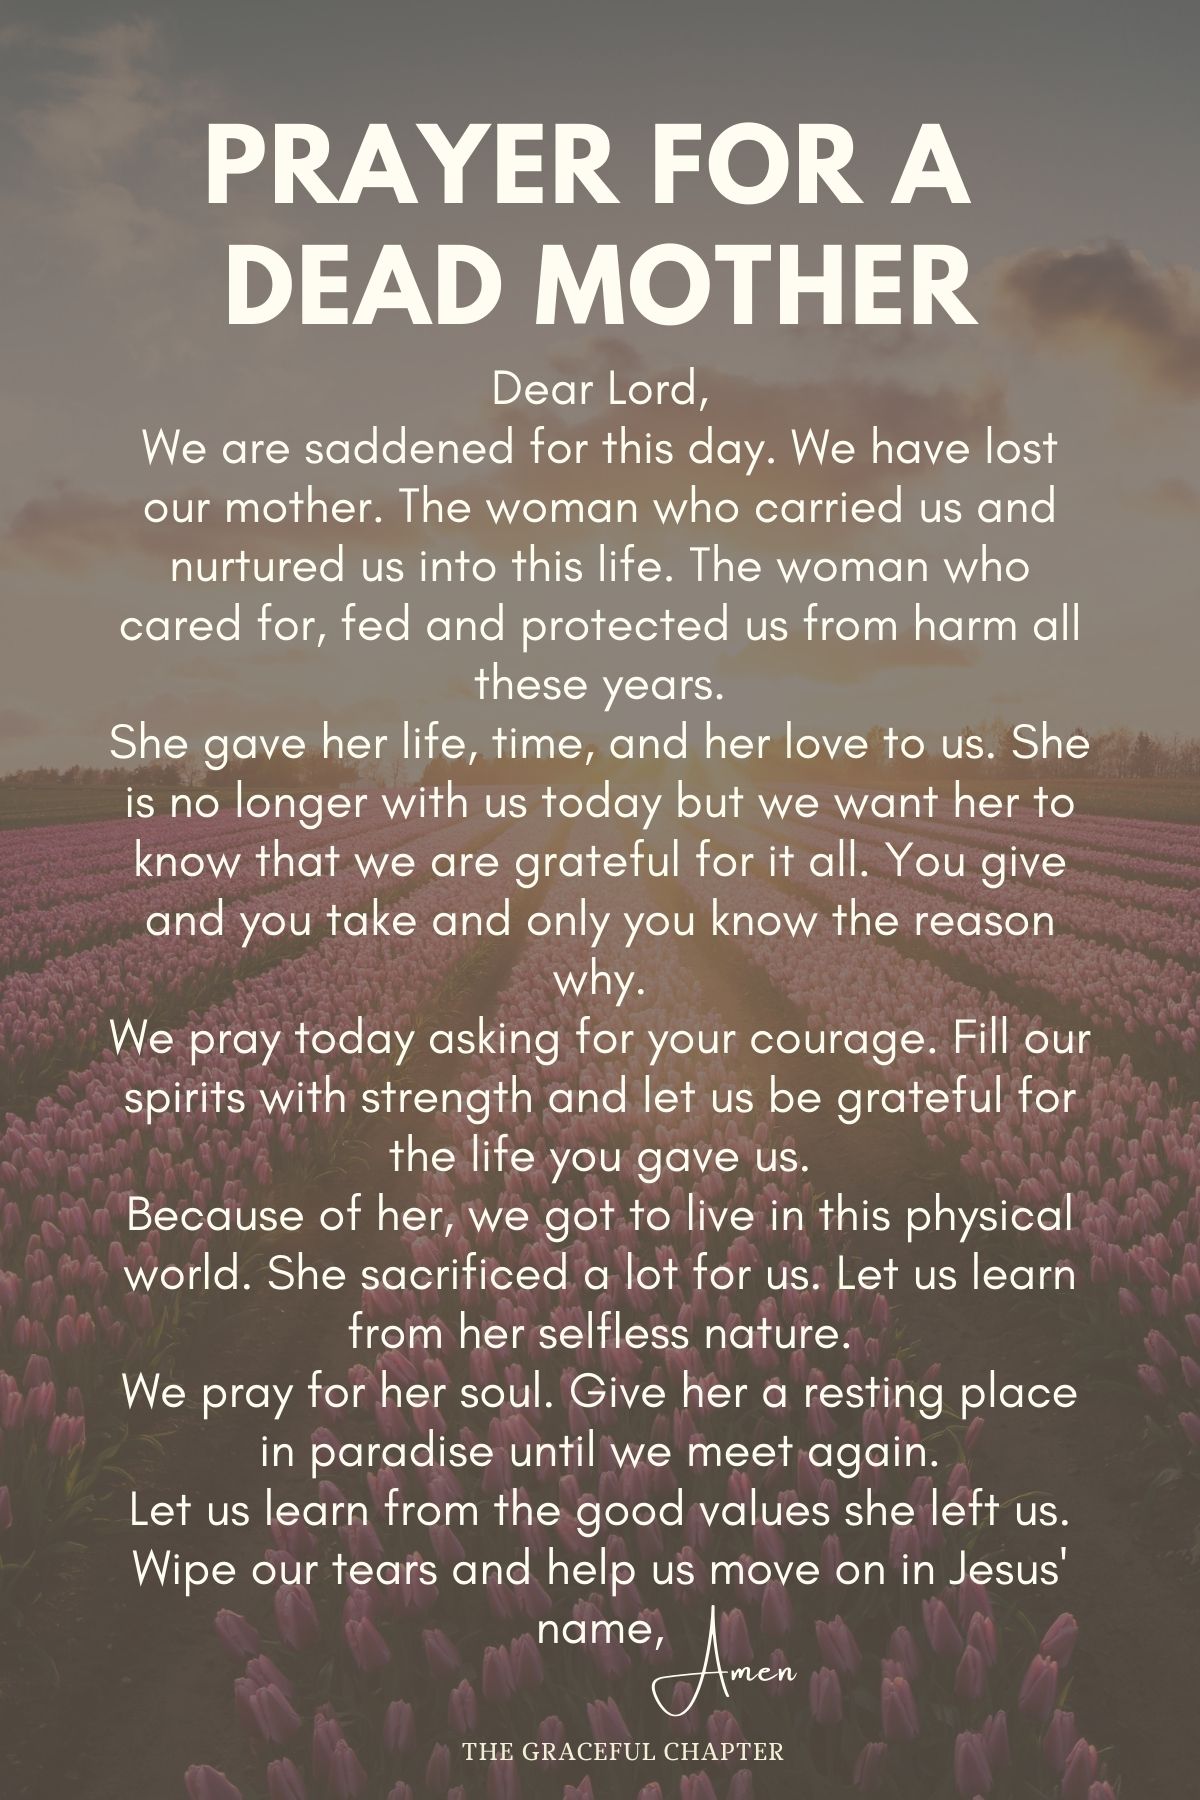 Prayer for a dead mother